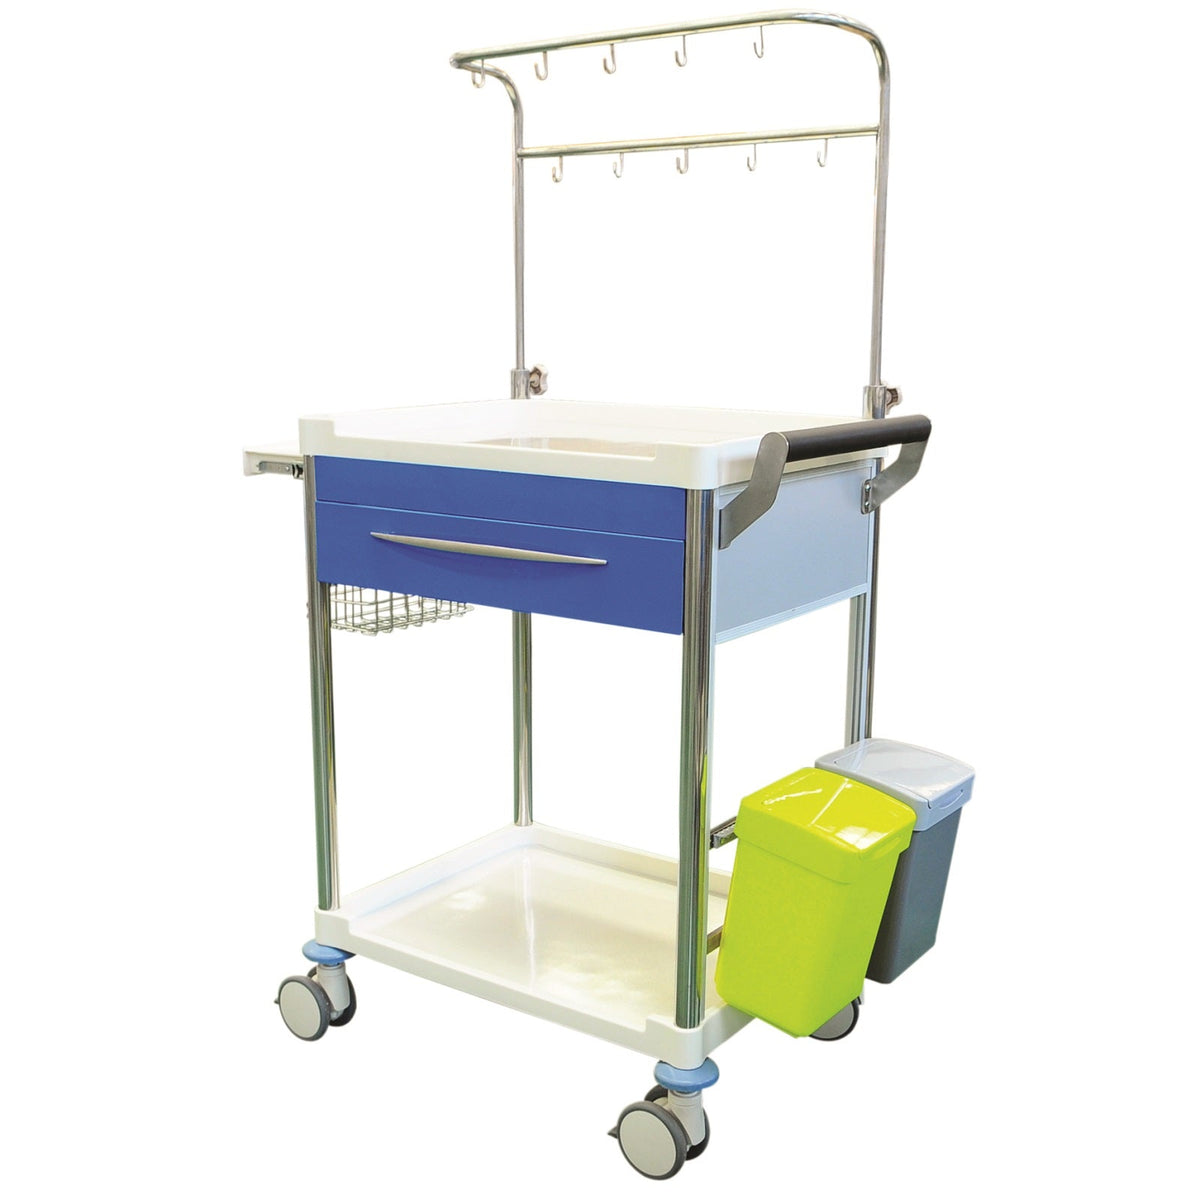 A fully featured infusion trolley including bins, basket &amp;amp; adjustable height IV bag pole.